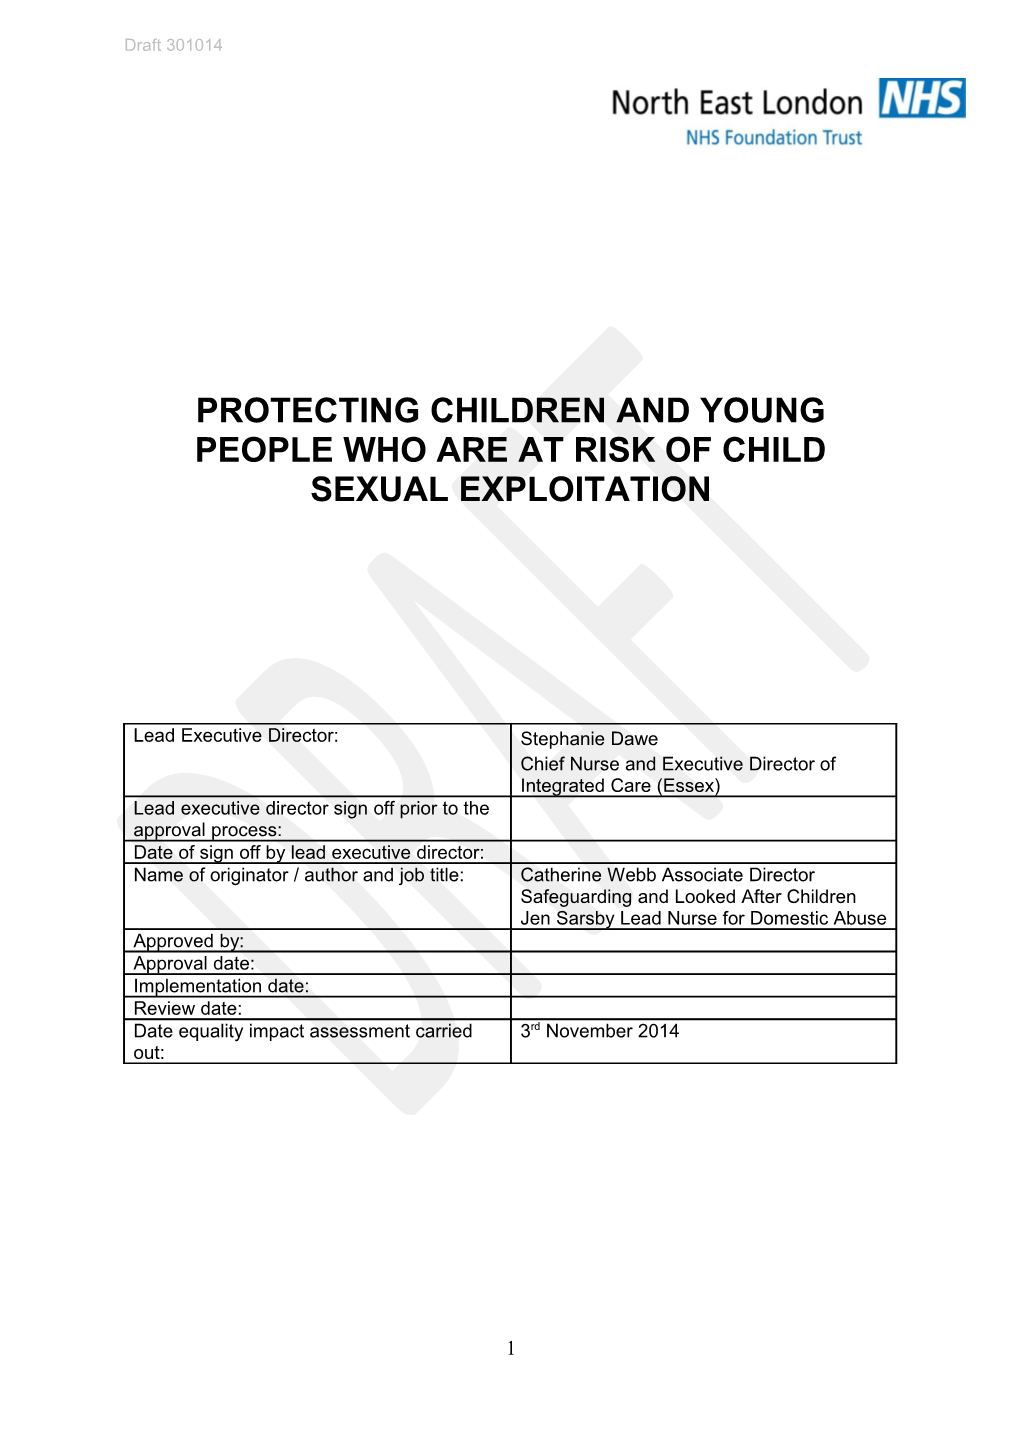 Protecting Children and Young People Who Are at Risk of Child Sexual Exploitation